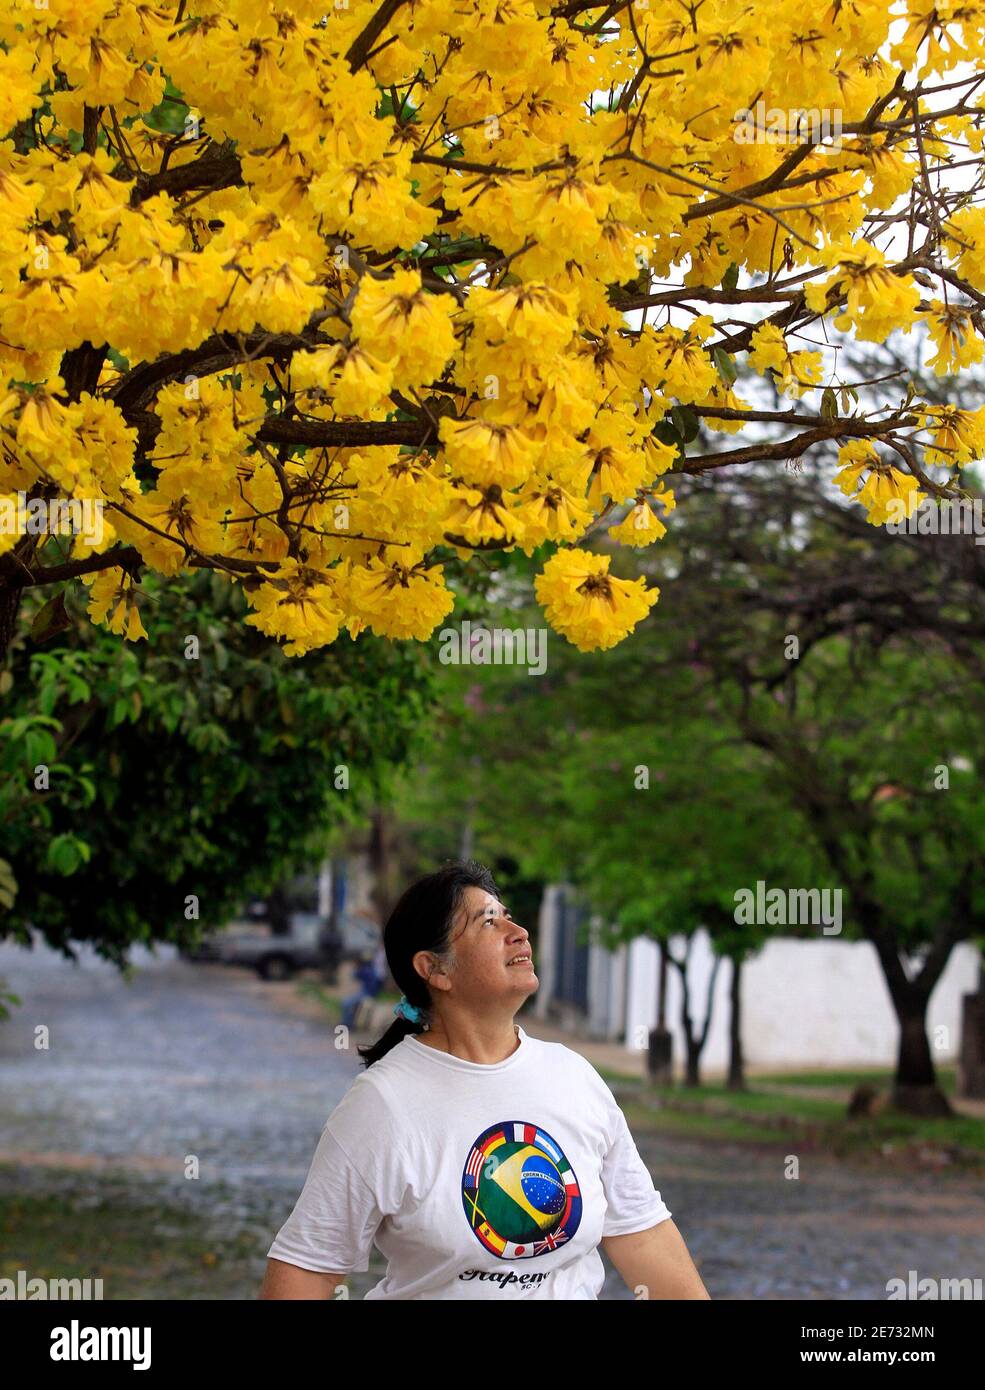 A woman looks at a blooming yellow lapacho tree in a residential neighborhood of Asuncion, September 16, 2009. The lapacho tree, known as the Paraguayan national tree by its Guarani name, tajy, bloomed full this year in its less common yellow variety.  REUTERS/Jorge Adorno  (PARAGUAY ENVIRONMENT SOCIETY) Stock Photo